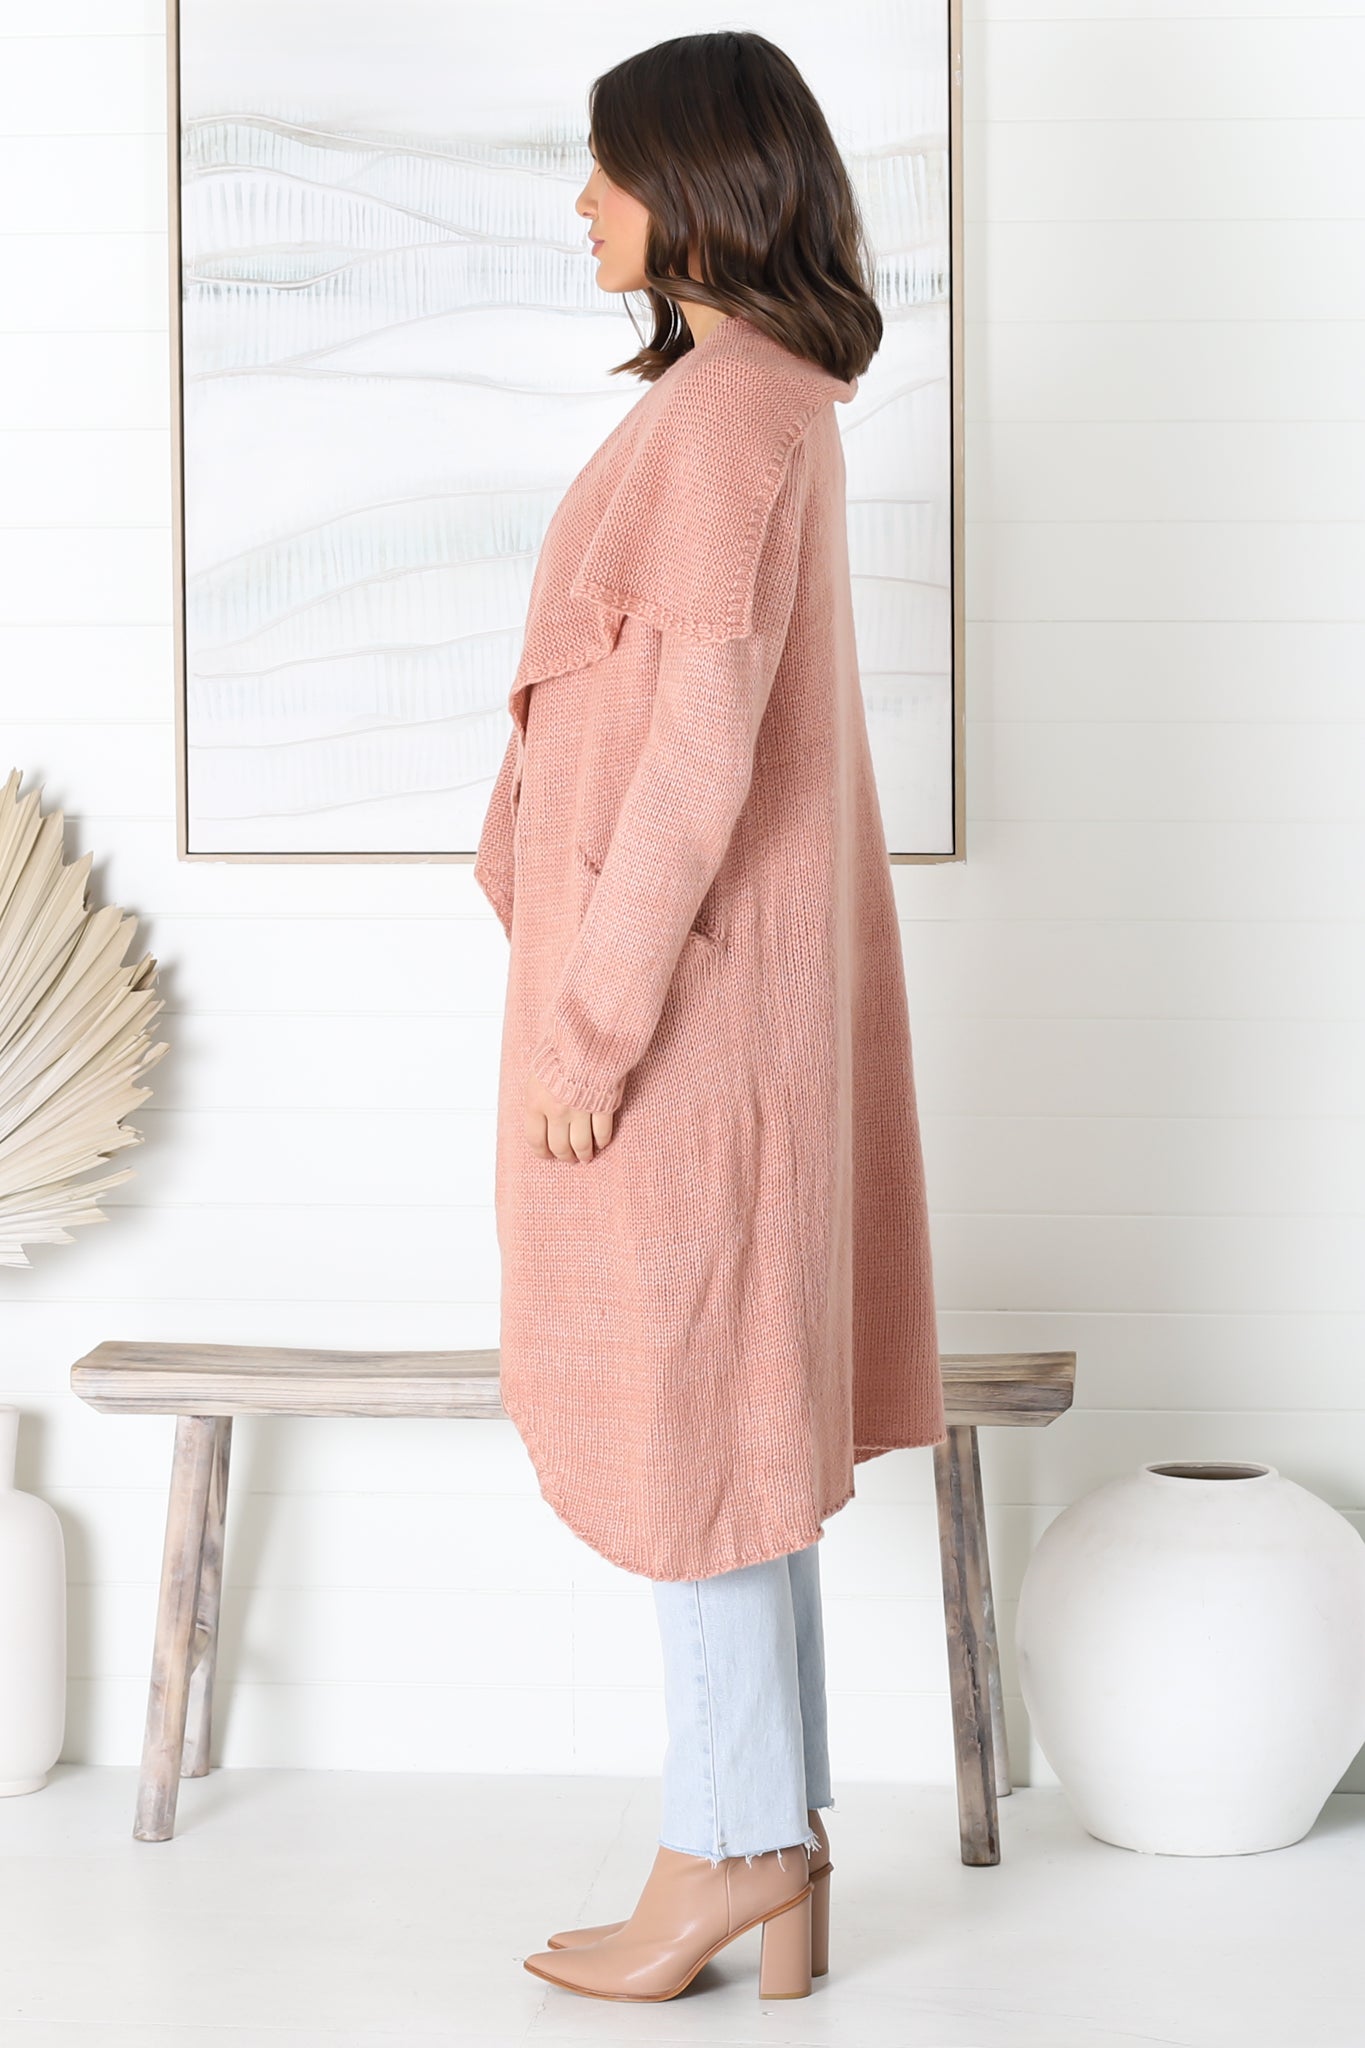 Ryden Cardigan - Thick Lapel Waterfall Collar Cardigan with Pockets in Blush